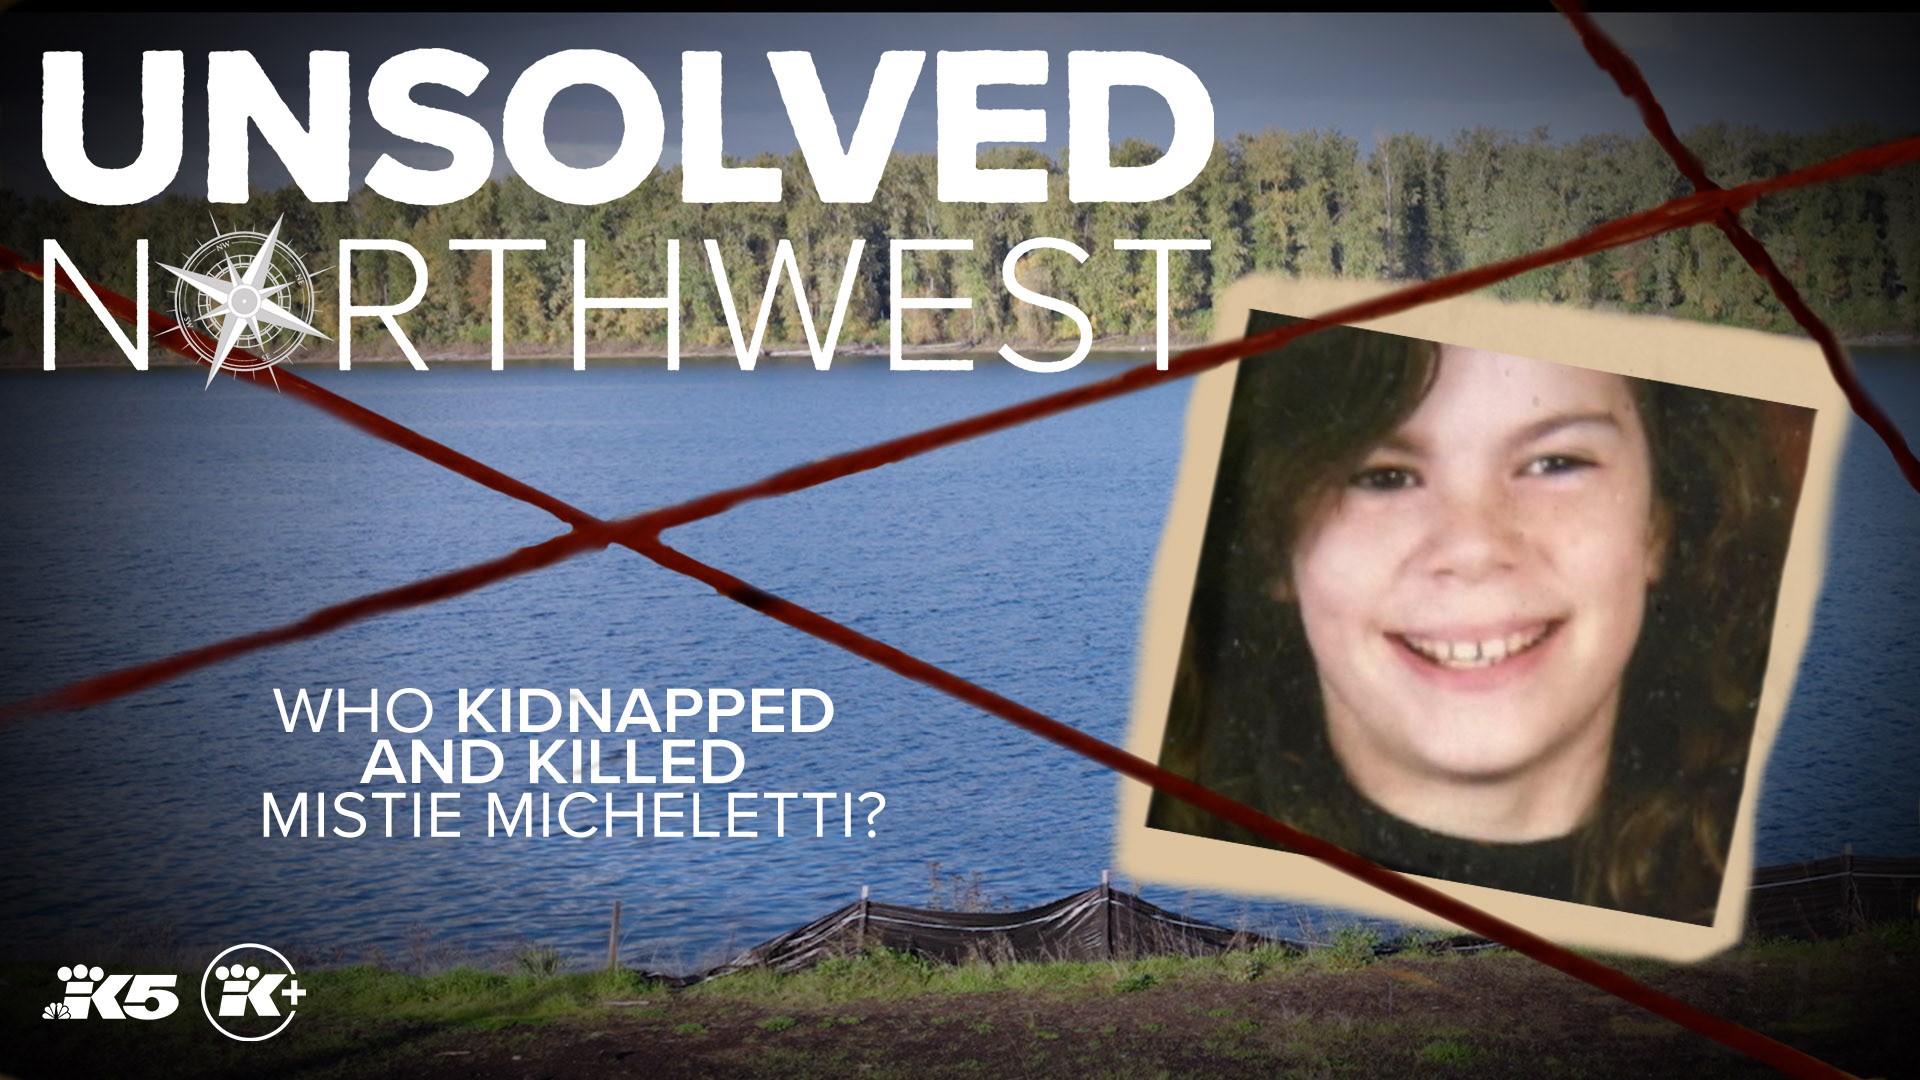 Mistie Micheletti was originally thought to be a runaway, but one month after they found her body in the Columbia River, investigators ruled the case a homicide.